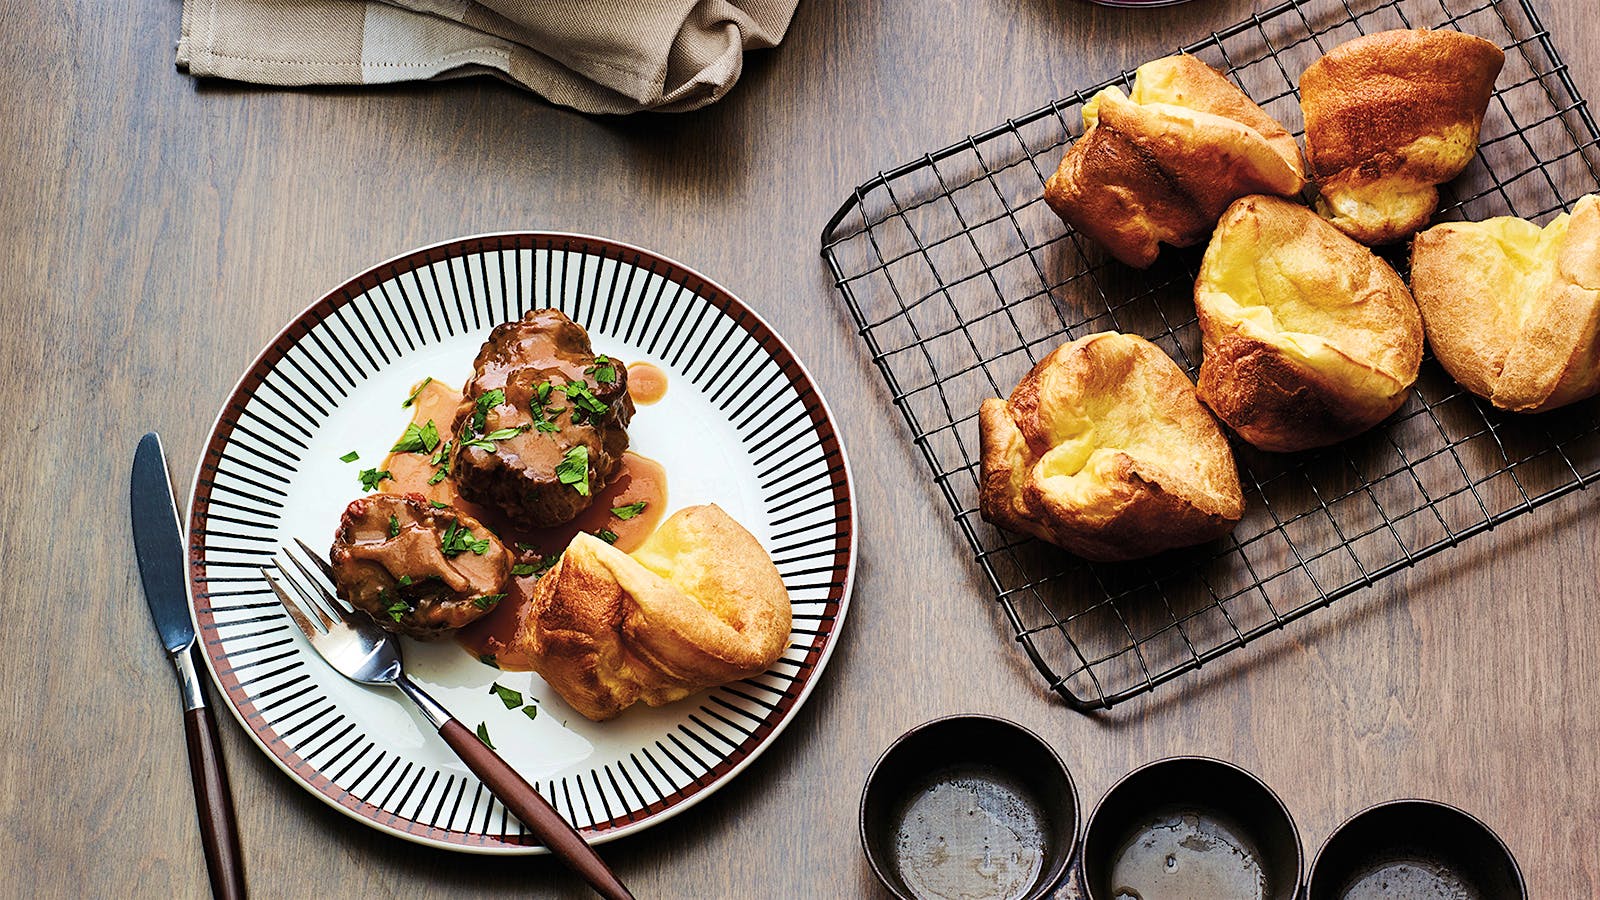 Slow-Cooked Oxtail with Popovers